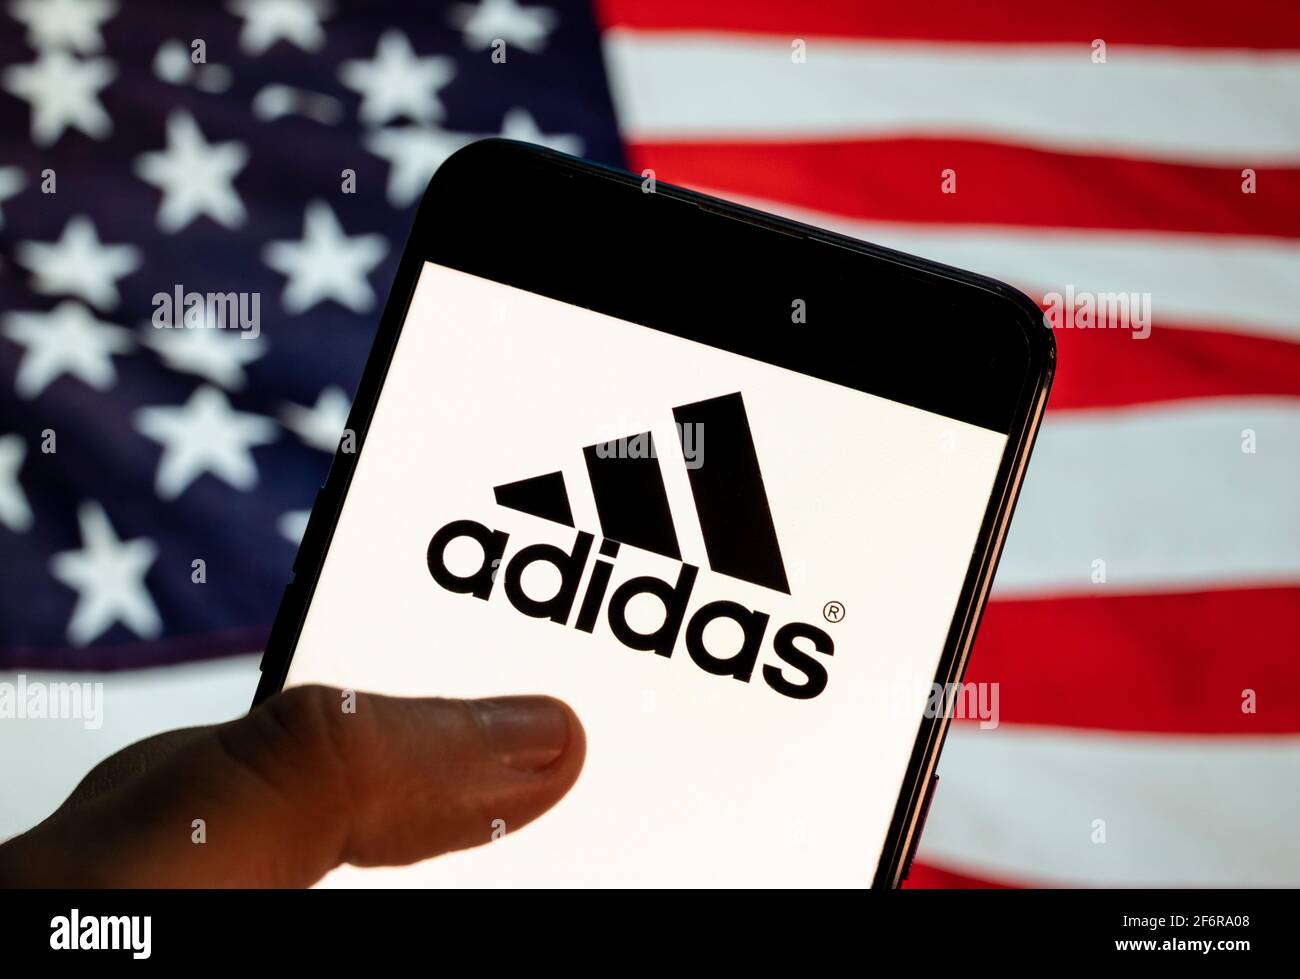 March 27, 2021, China: In this photo illustration the German multinational  sport clothing brand Adidas logo is seen on an Android mobile device with United  States of America (USA), commonly known as